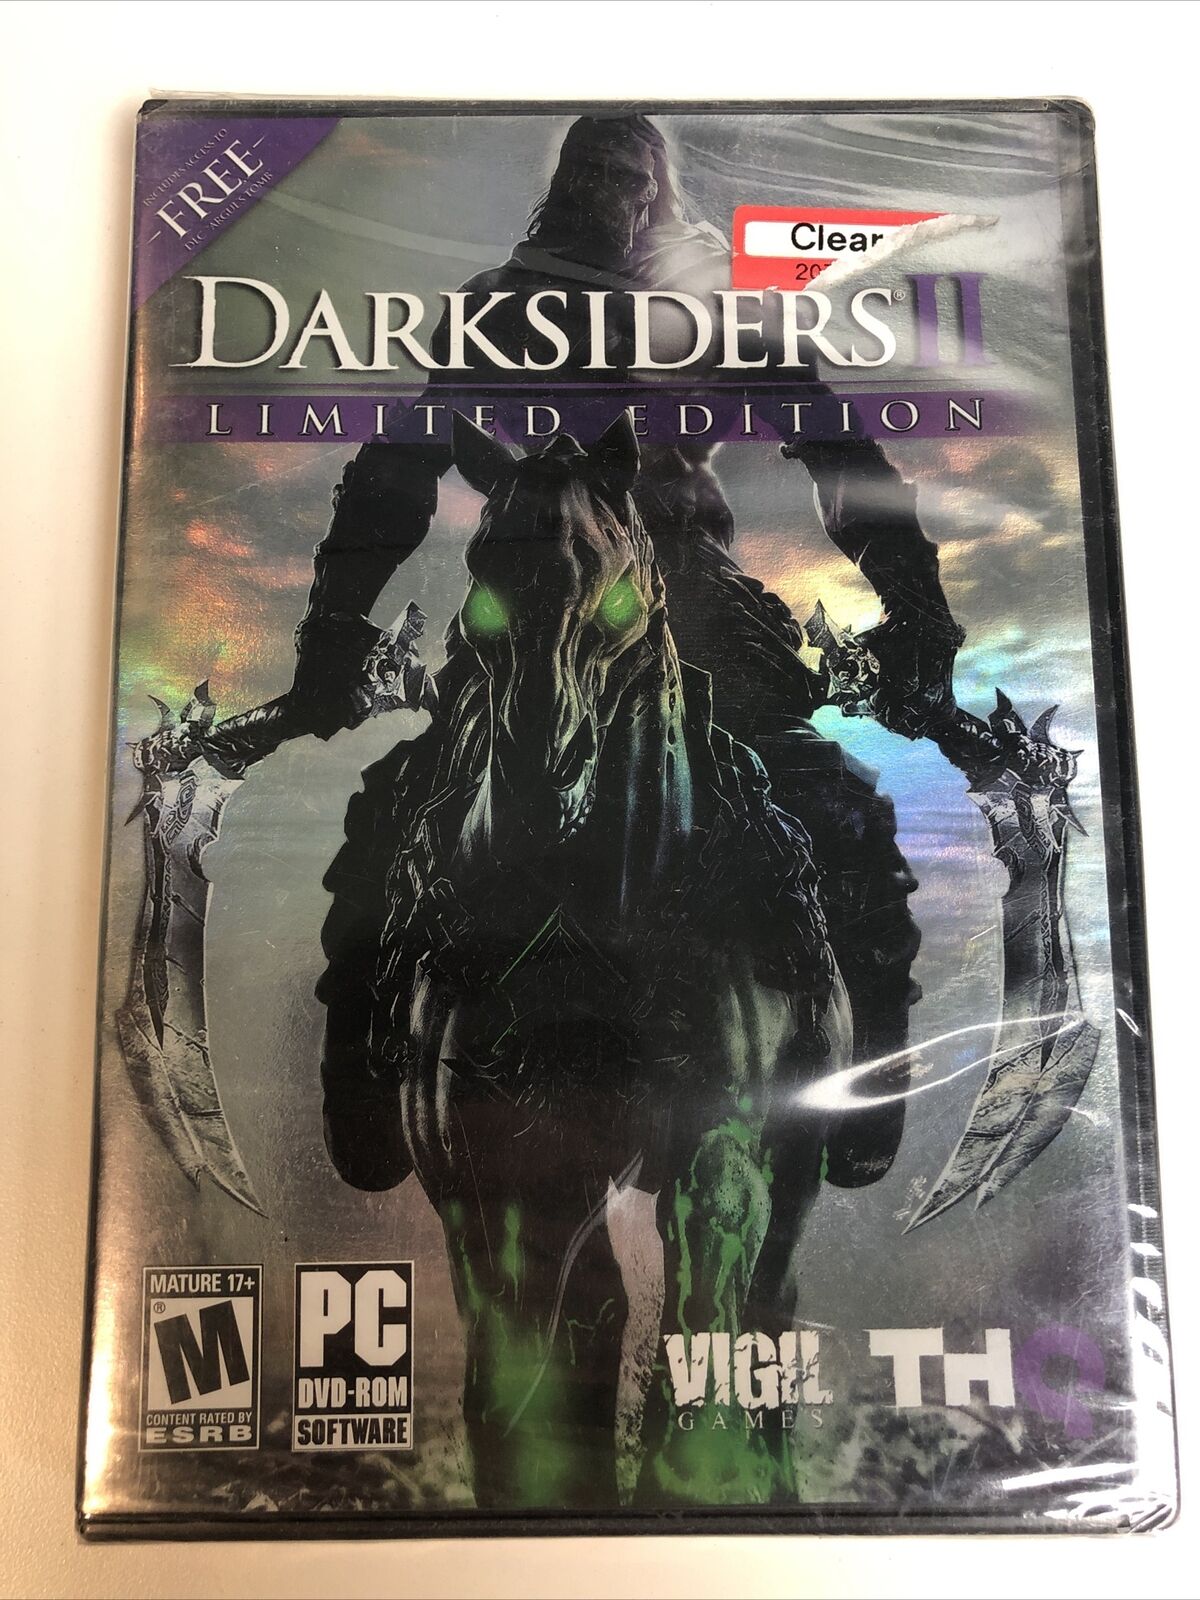 Darksiders II Limited Edition (PC, 2012)